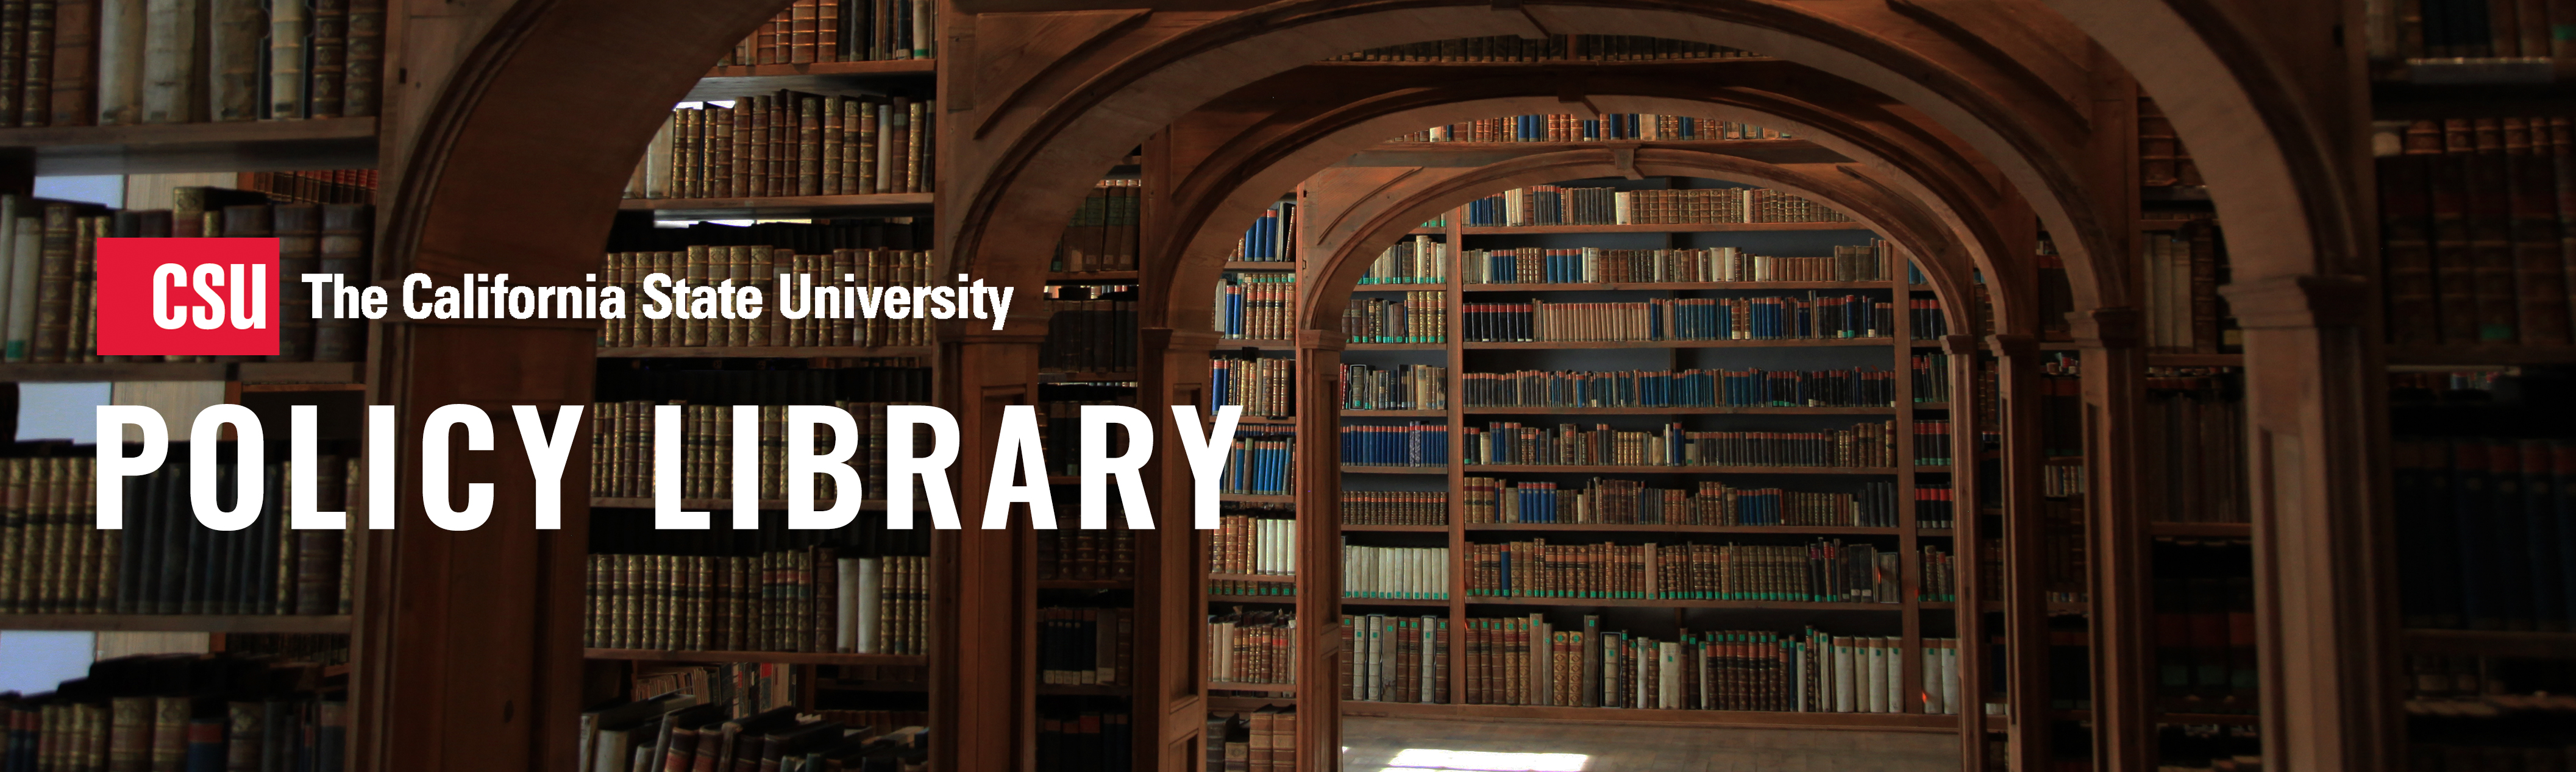 Policy Library Banner 03.jpg